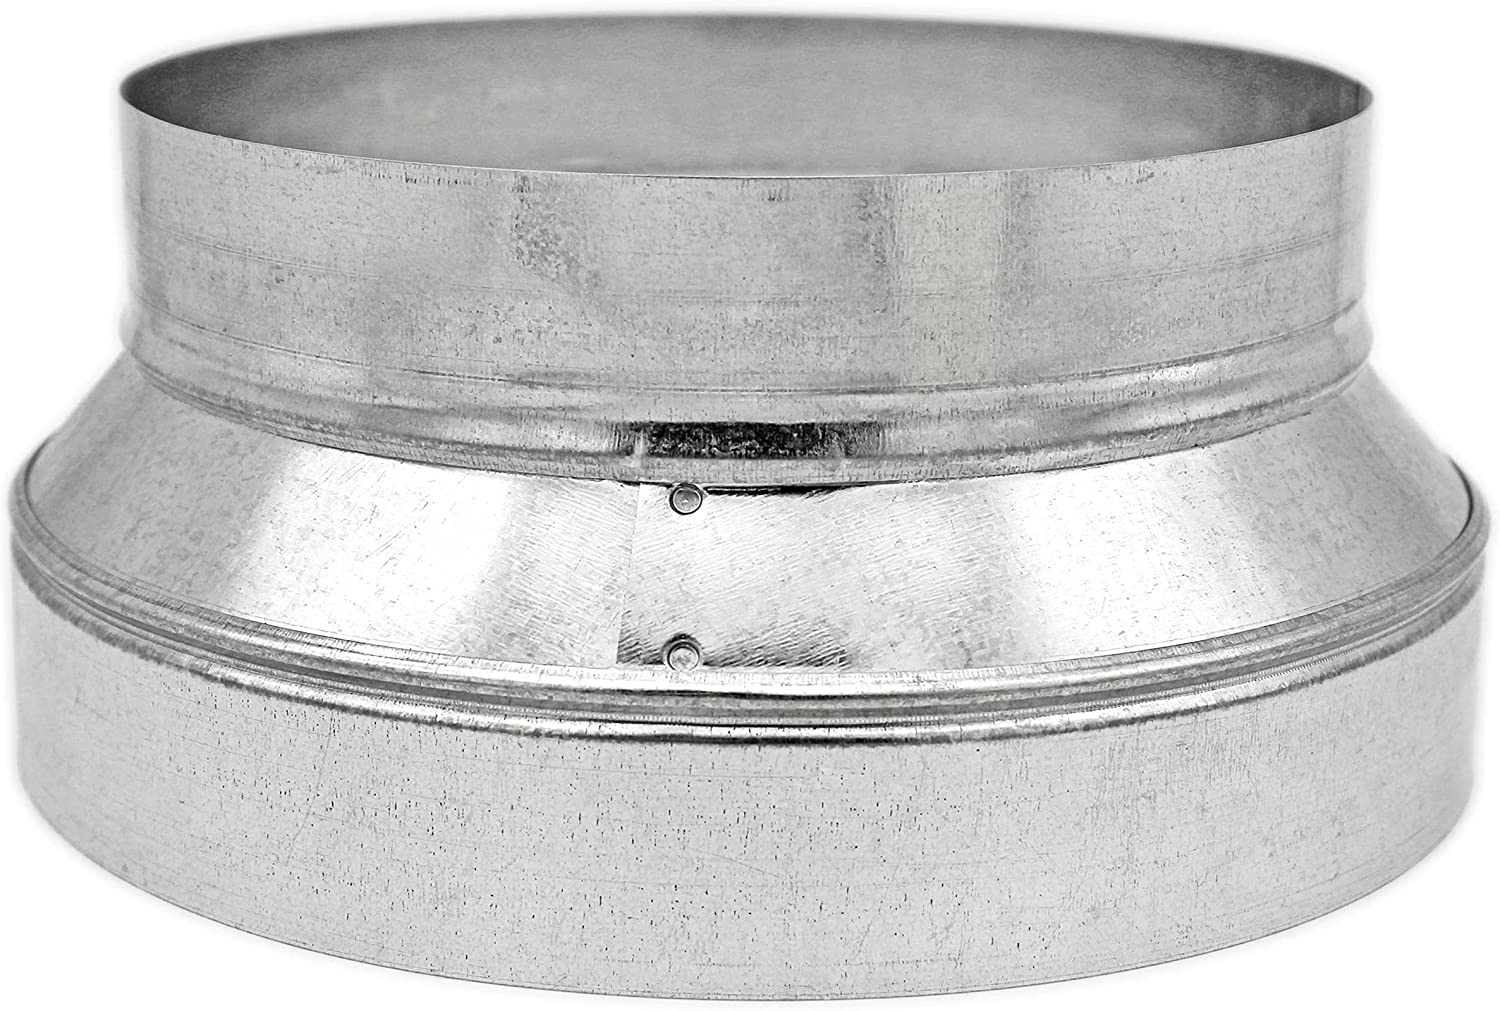 HVAC Premium Round Metal Pipe Reducer & Increaser | 7" to 6" HVAC Duct Reducer or Increaser 30g Gauge | Galvanized Sheet Metal Ducting Connector is Compatible with Duct 6"